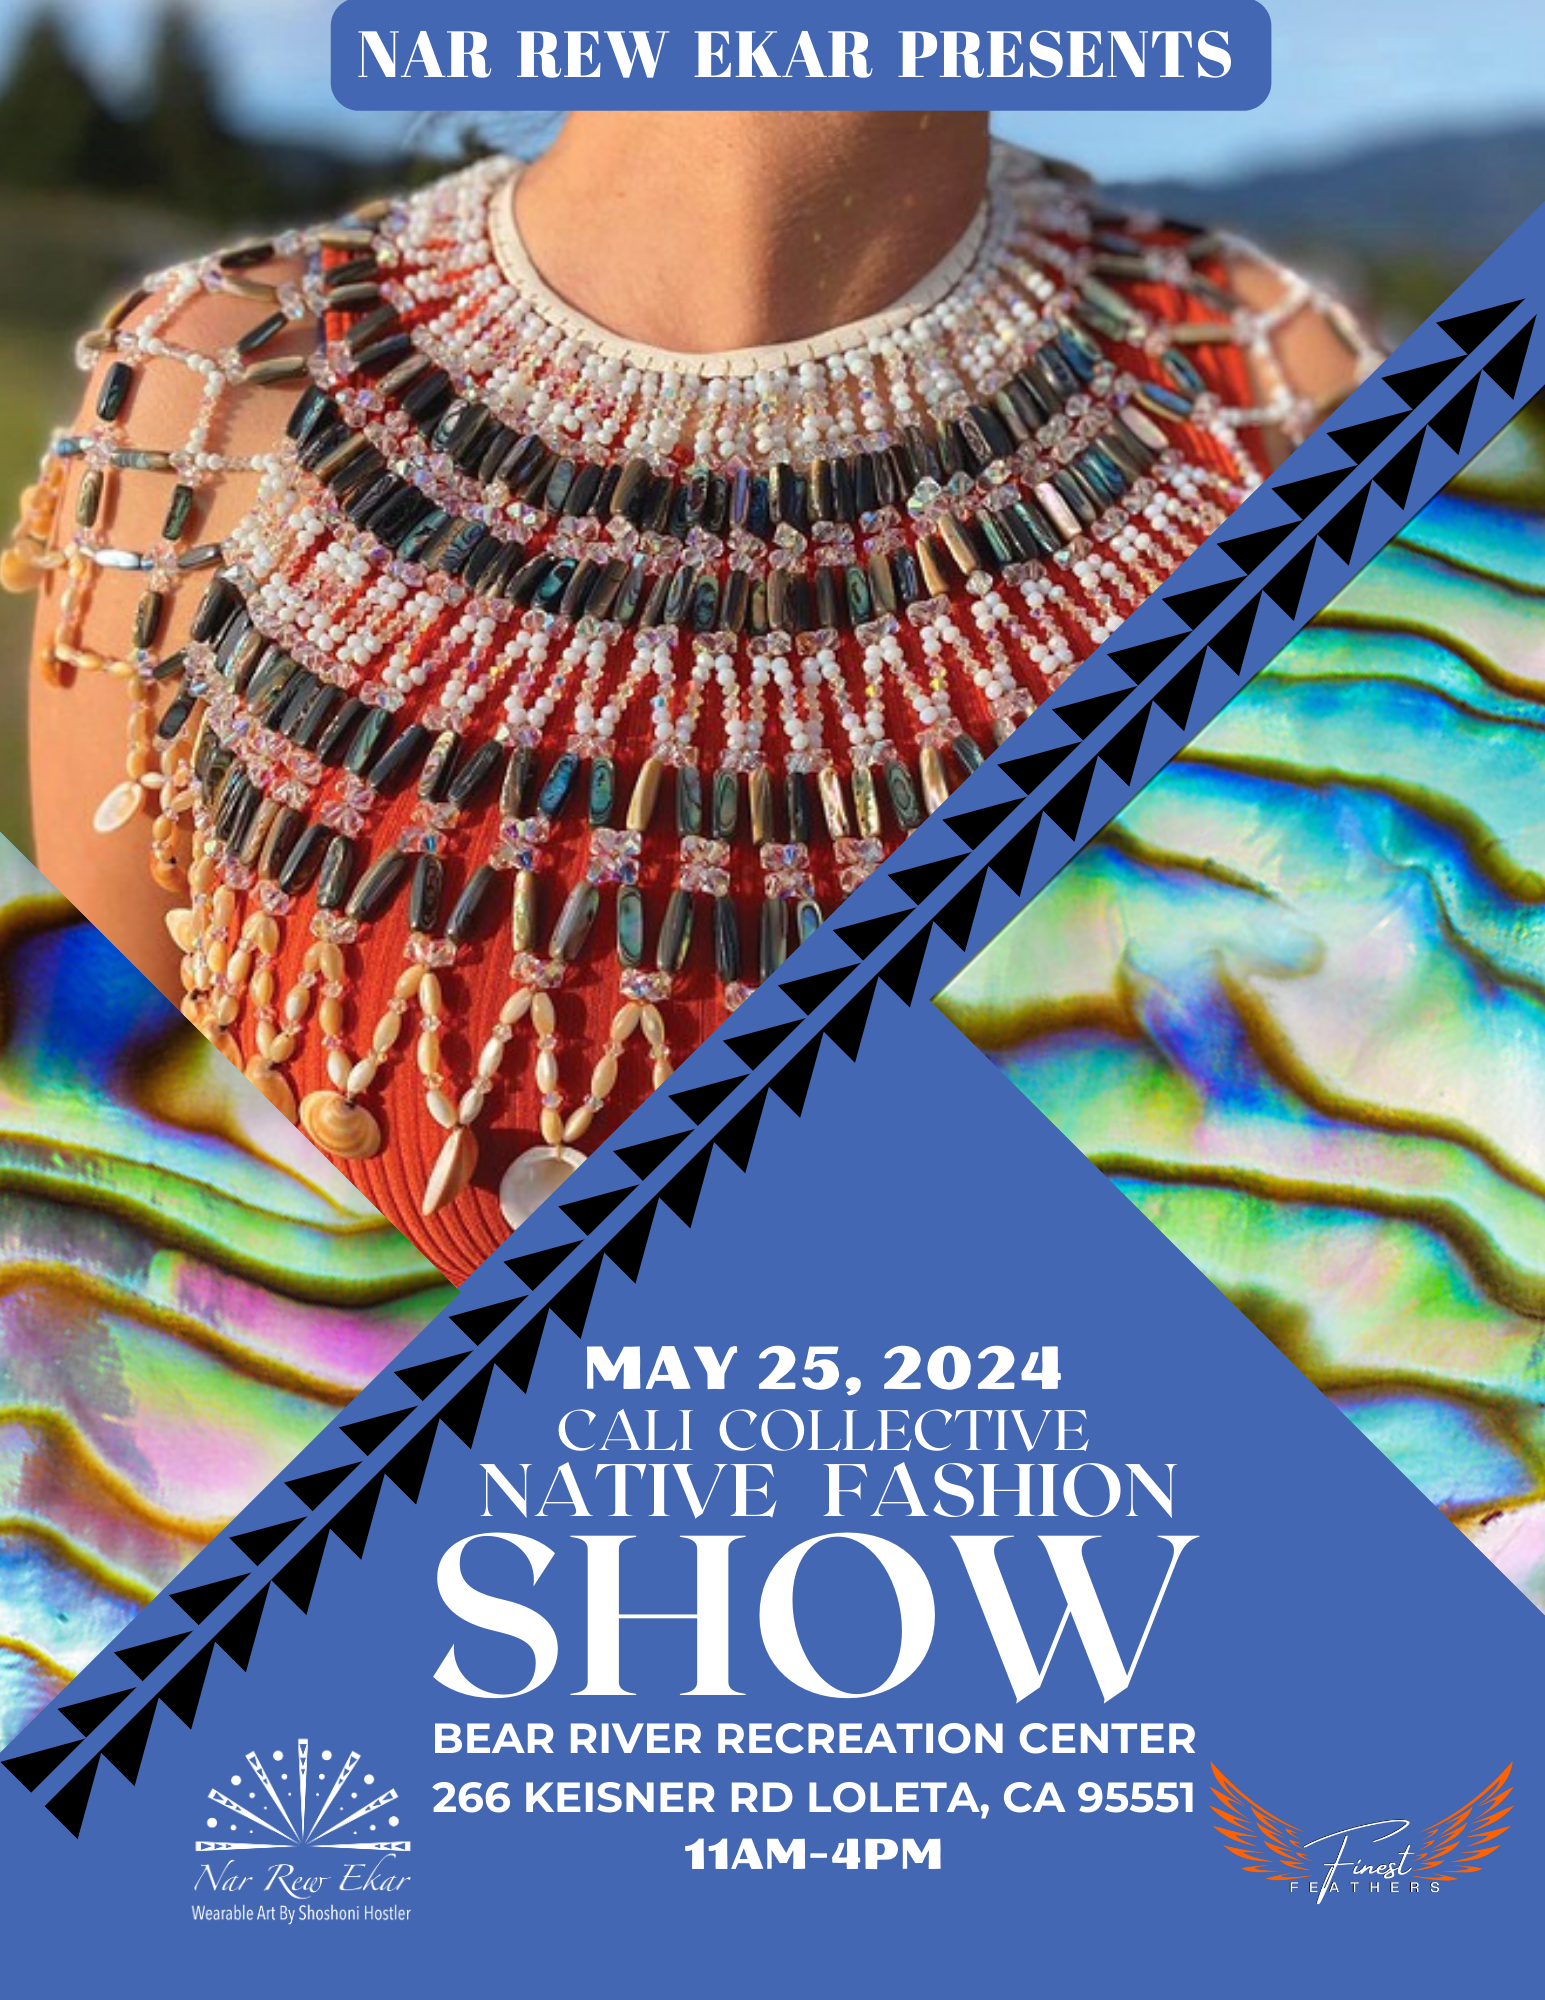 A large beaded necklace with various bead shapes and sizes as well as shells, which drapes over the chest and shoulders of a model. May 25, 2024. Cali Collective Native Fashion Show. Bear River Recreation Center, 266 Keisner Rd, Loleta, CA 95551. 11AM - 4PM. Logos for Nar Rew Ekar, Wearable Art By Shoshoni Hostler and Finest Feathers.